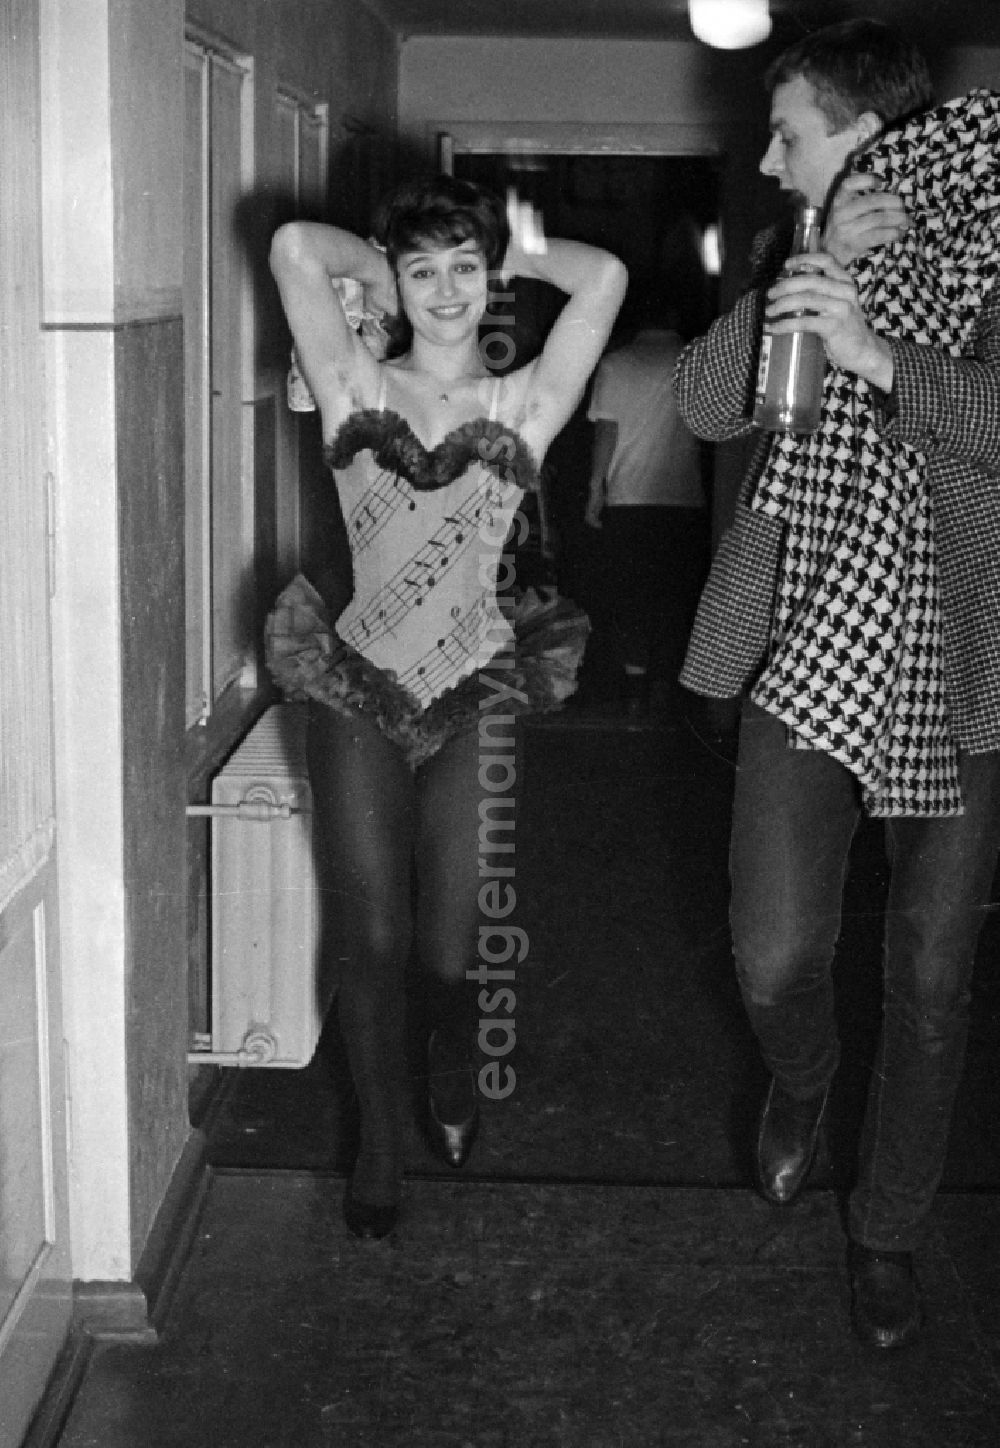 GDR photo archive: Potsdam - The actress Angelica Domroese during a carnival event at the film school in the district Babelsberg in Potsdam in the state Brandenburg on the territory of the former GDR, German Democratic Republic